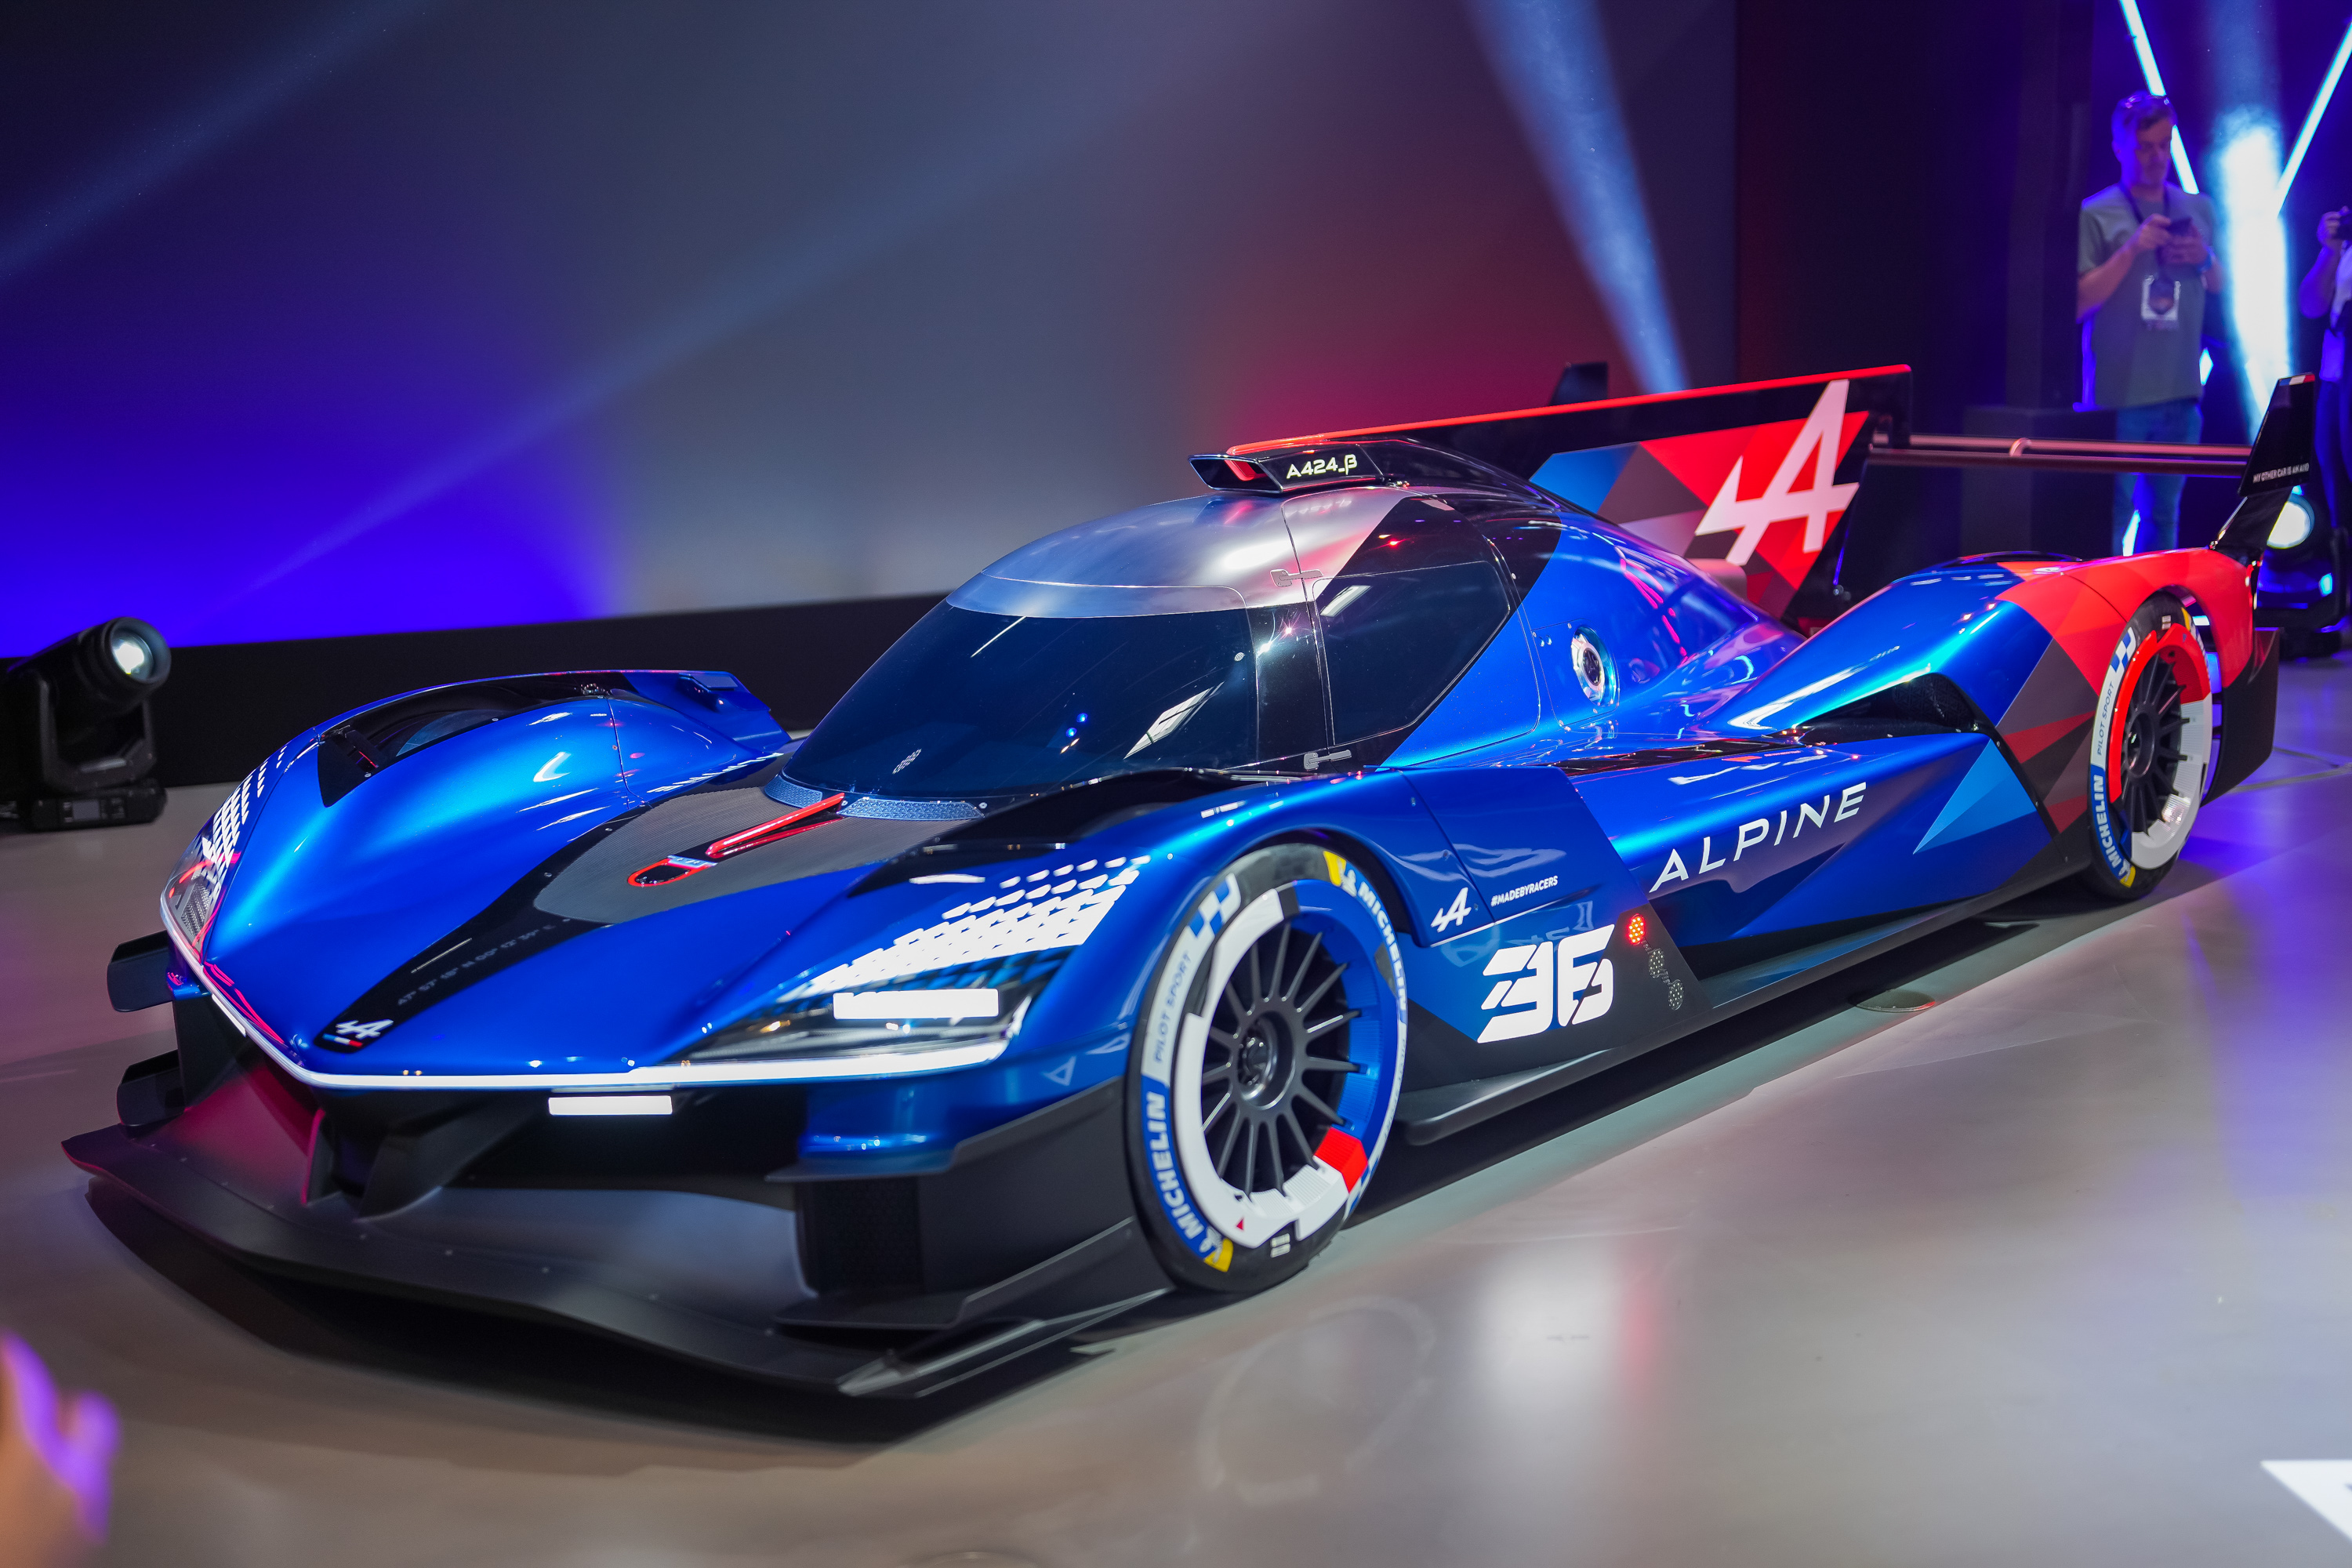 Alpine introduces the world to its Hypercar, the A424_β | 24h-lemans.com